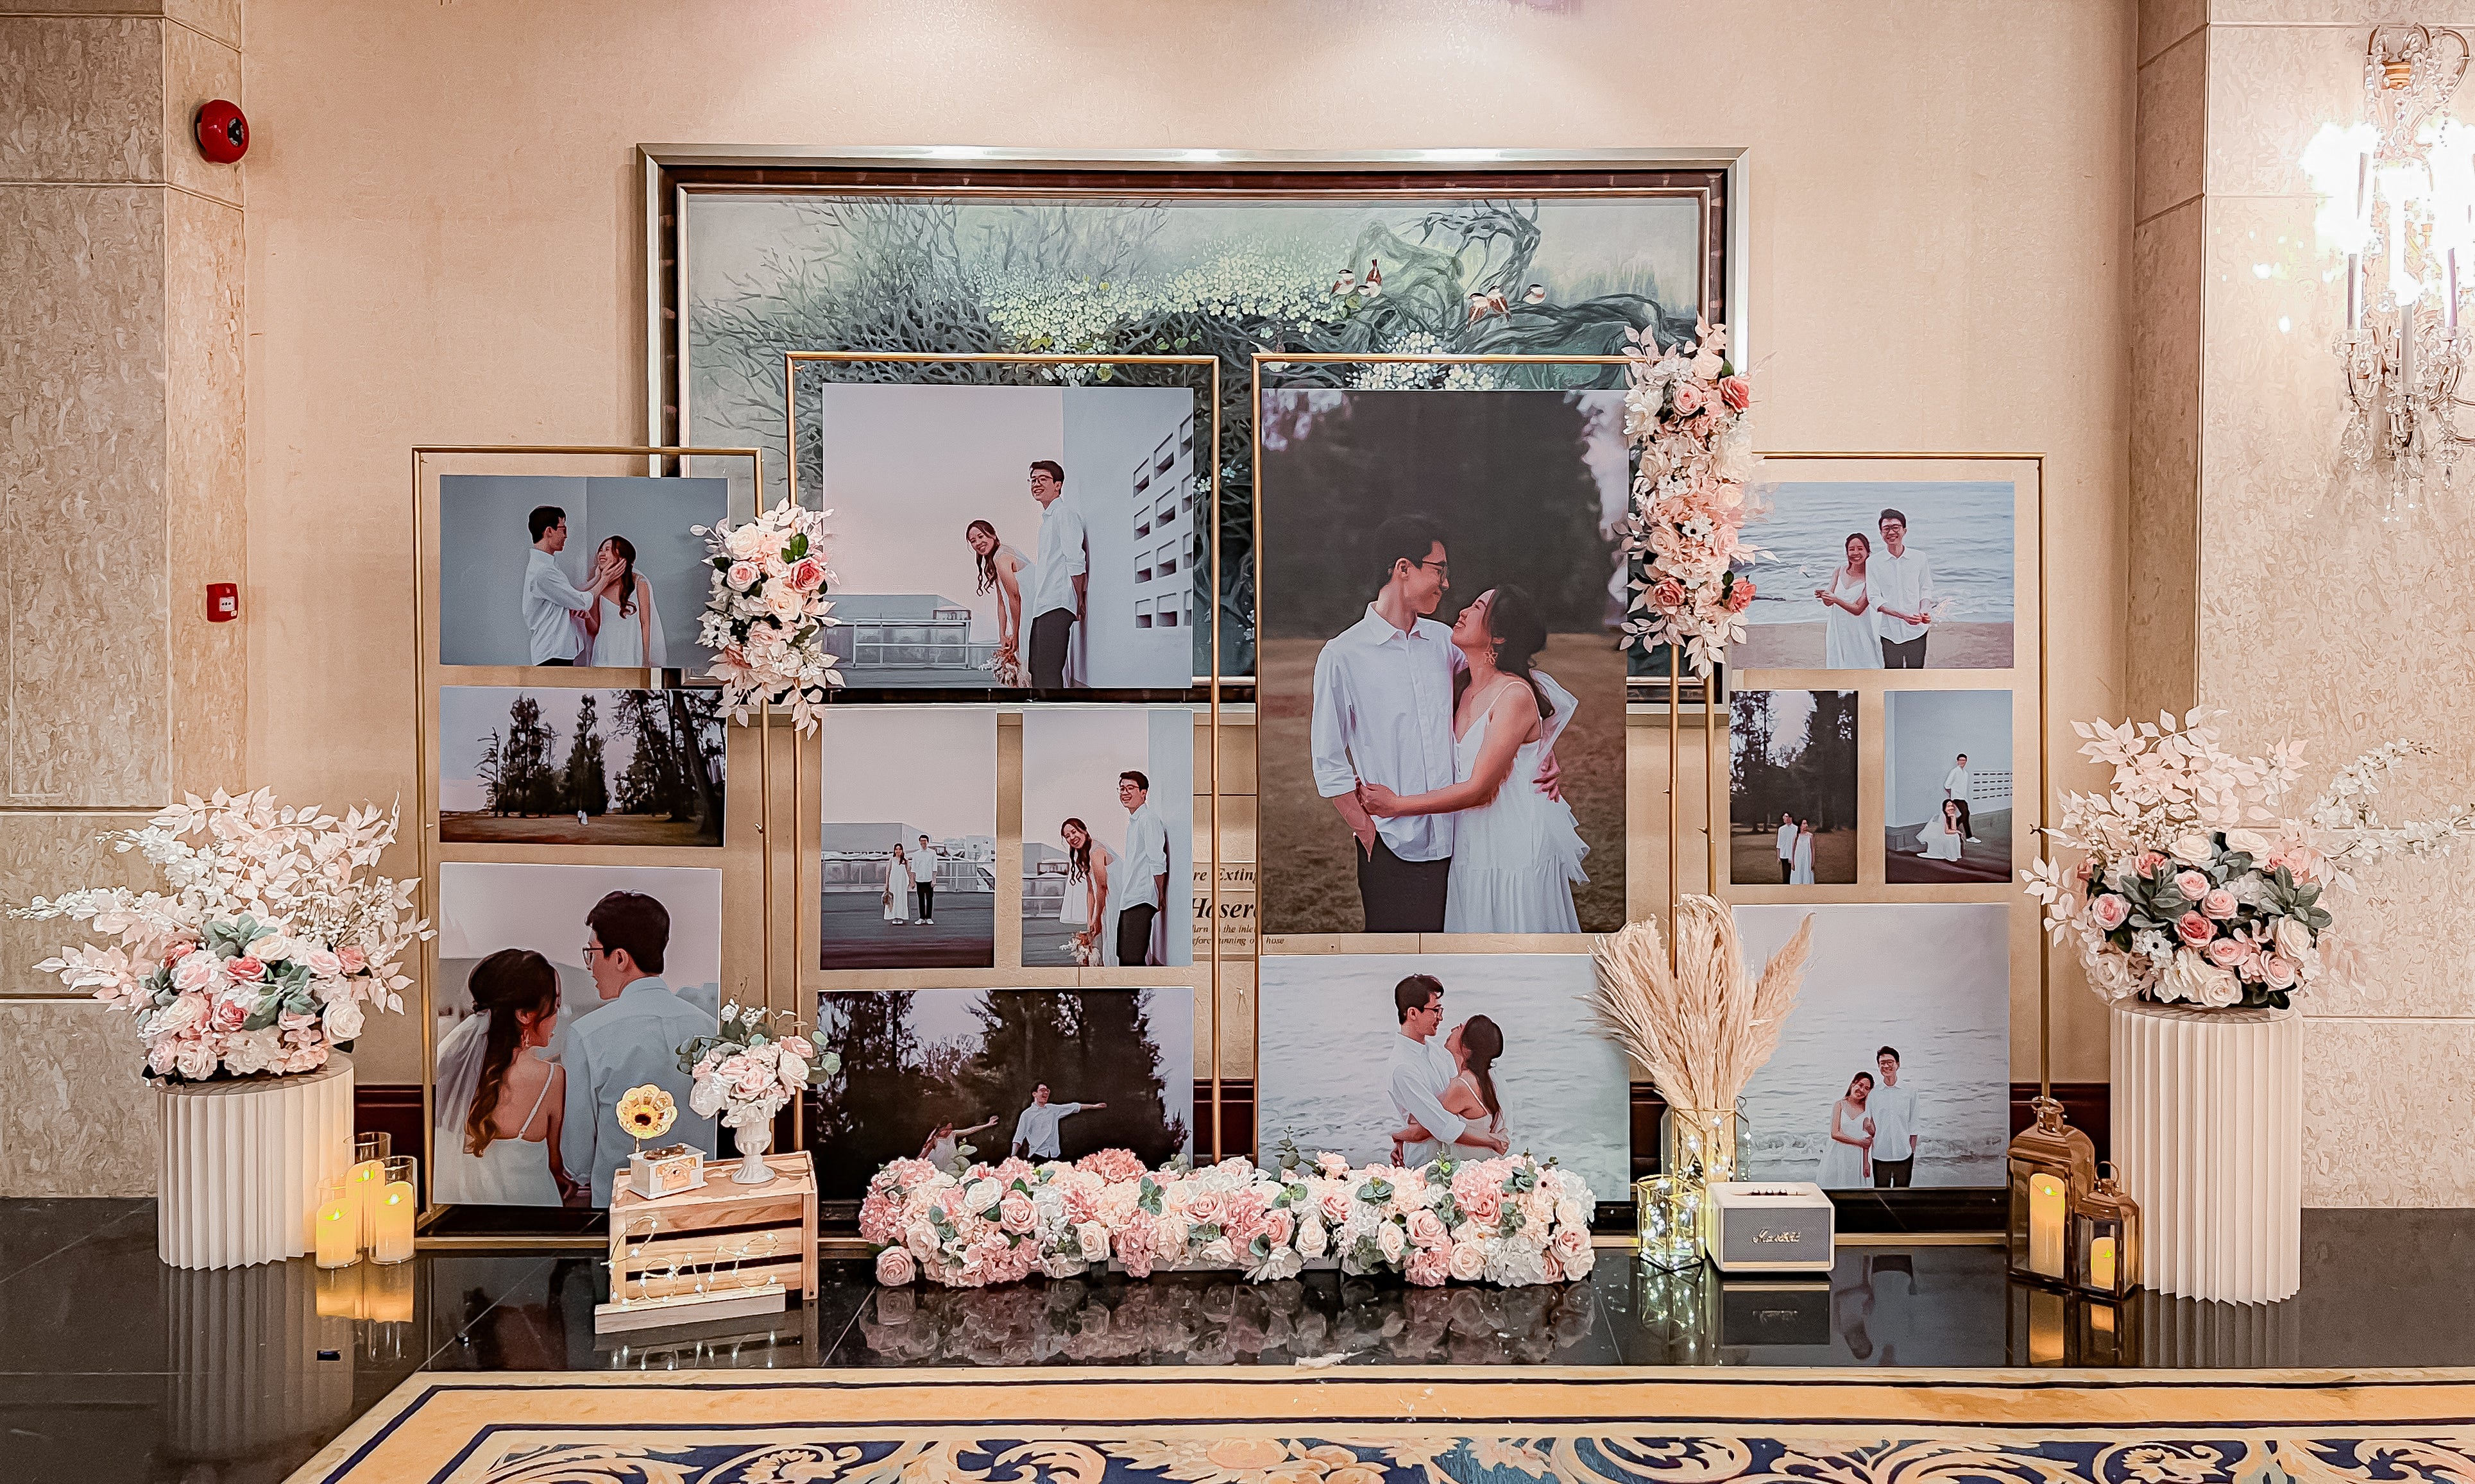 Wedding Reception Decor in Singapore - Multi-stands Photo Gallery with Pink White Peach Florals (Venue: Shangri-La Singapore)